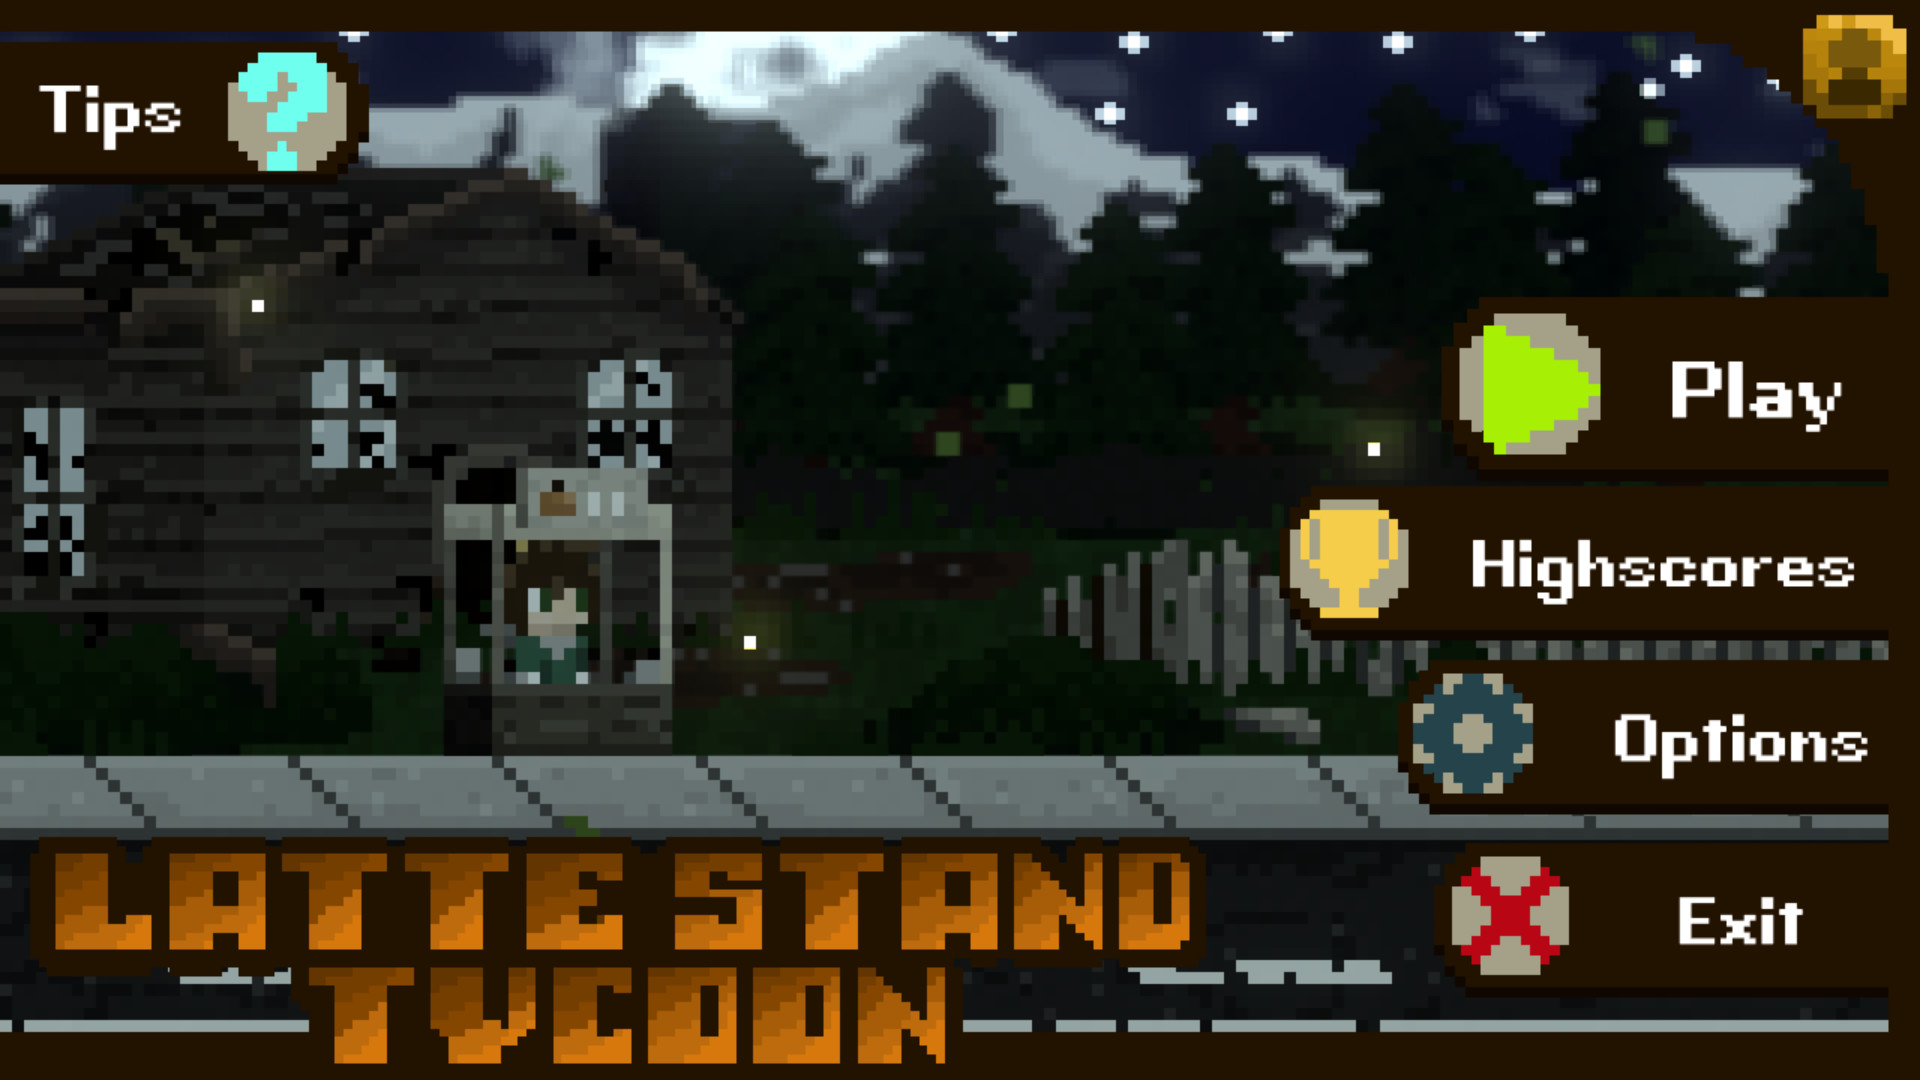 [$ 0.7] Latte Stand Tycoon Steam CD Key